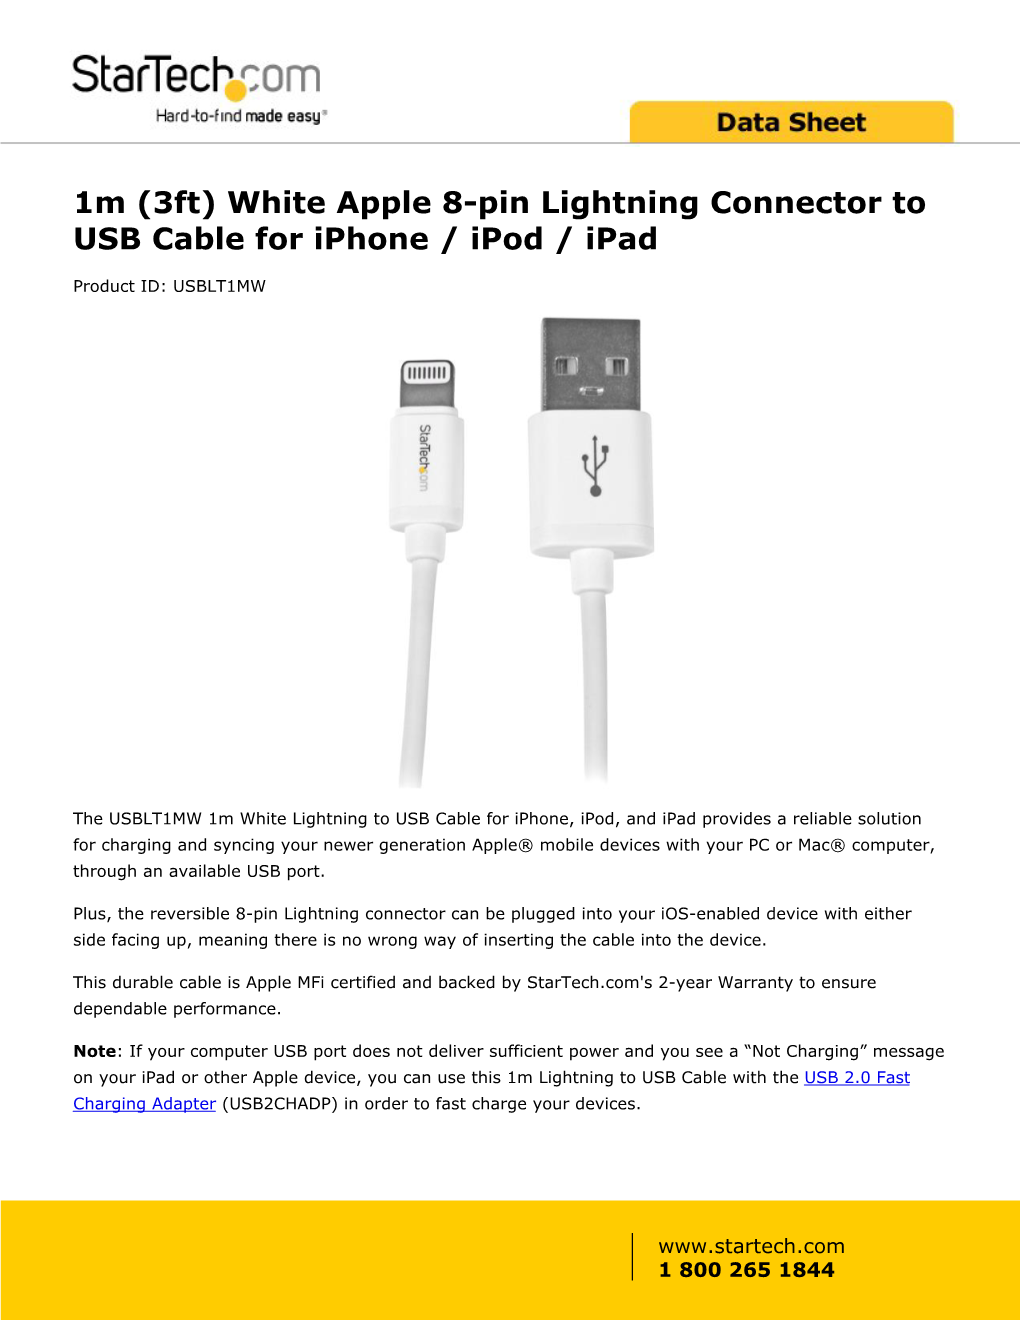 1M (3Ft) White Apple 8-Pin Lightning Connector to USB Cable for Iphone / Ipod / Ipad